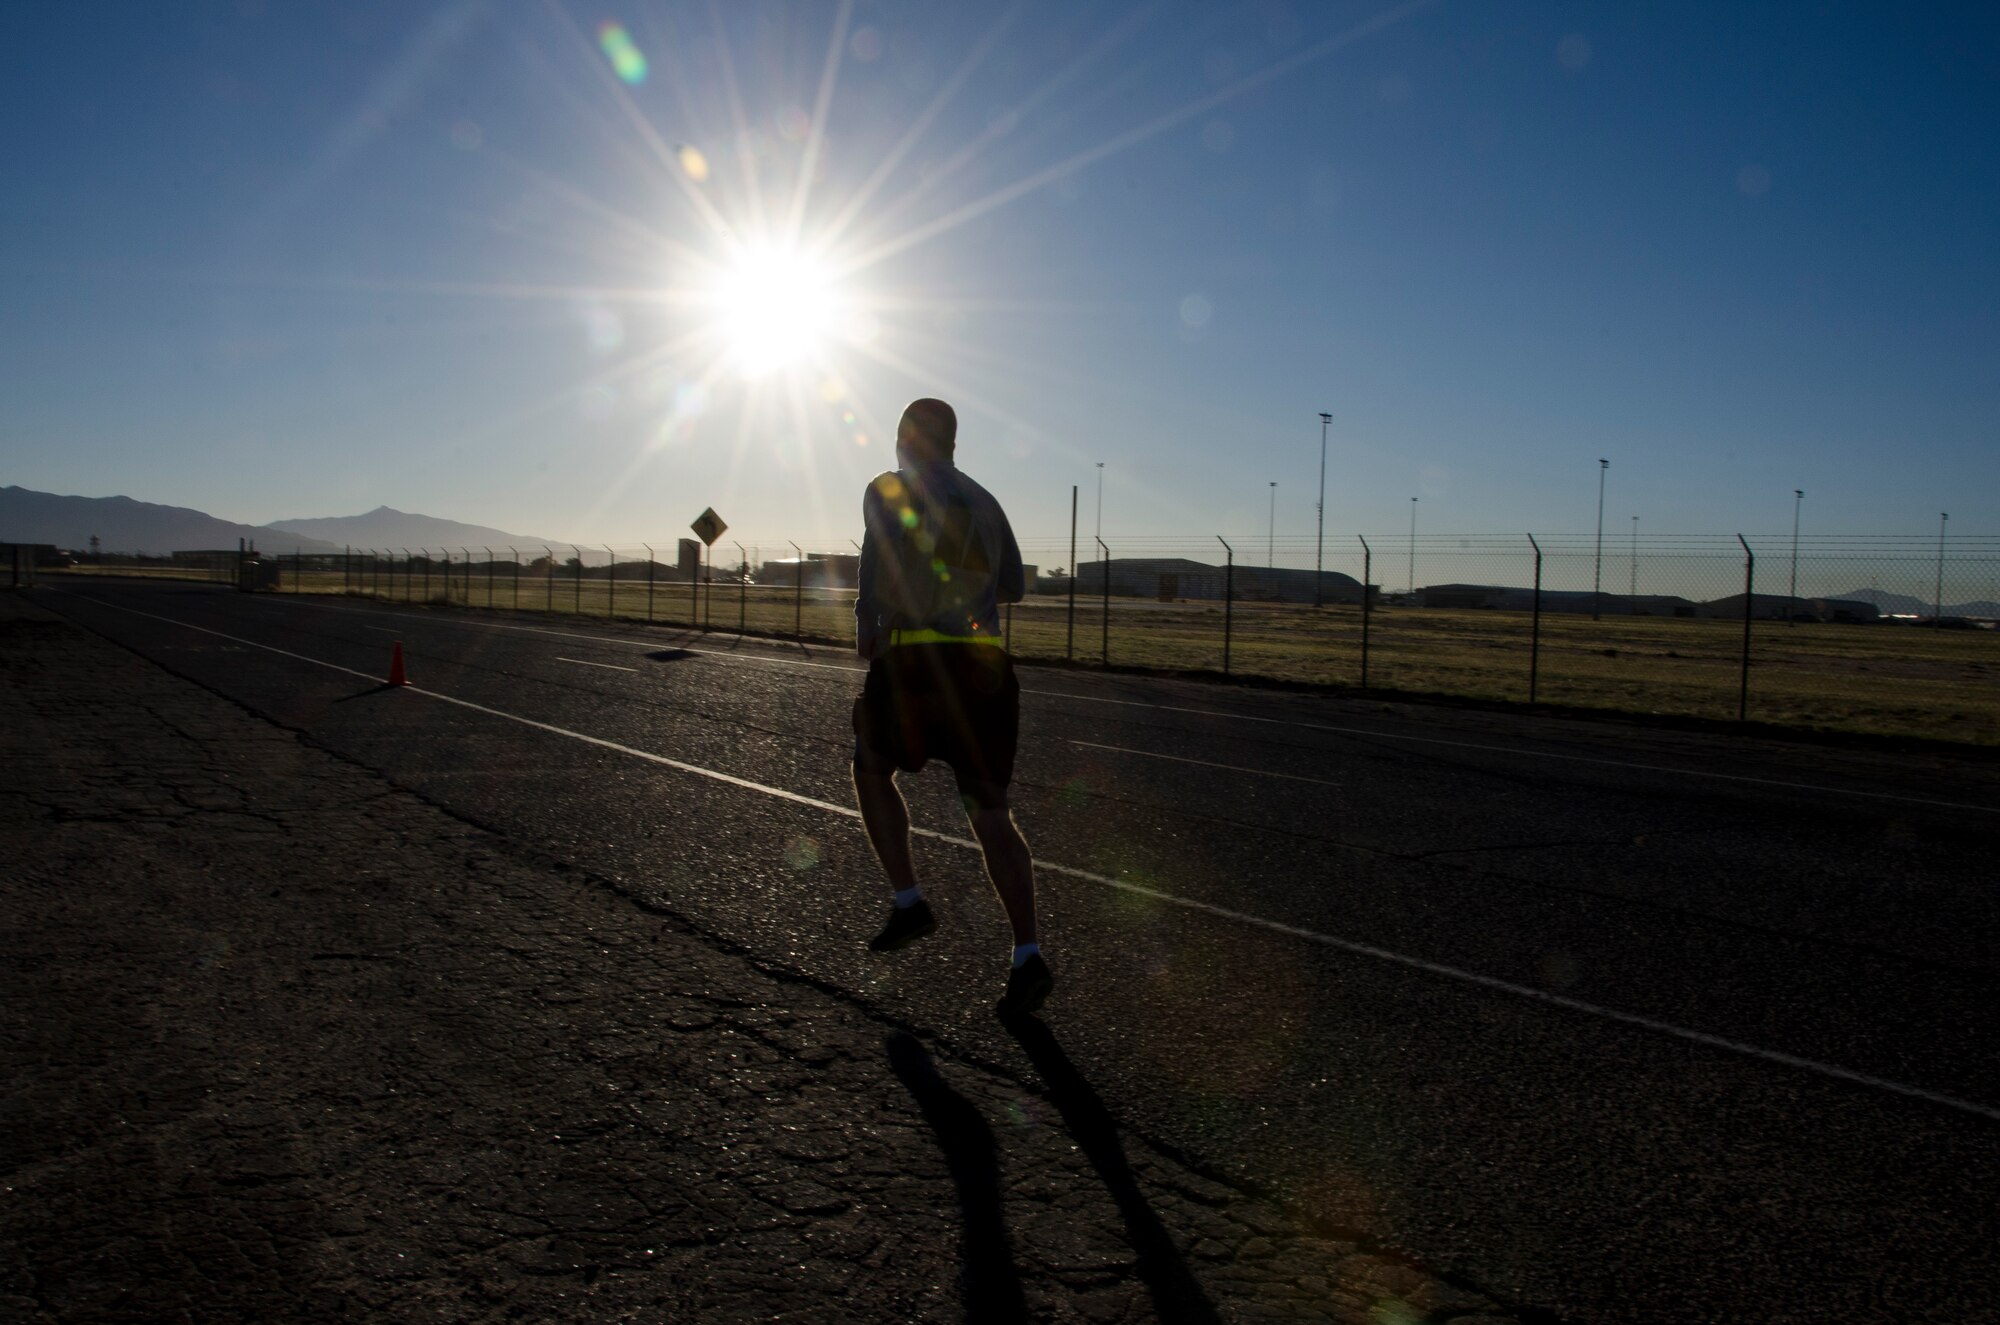 A member of the 1st Battlefield Coordination Detachment finishes the run portion of the Army physical fitness test at Davis-Monthan AFB, Ariz.,  Nov. 4, 2014. Performance on the test  is strongly linked to a soldier's fitness level and his or her ability to do fitness related tasks. (U.S. Air Force photo by Staff Sgt. Adam Grant/Released)